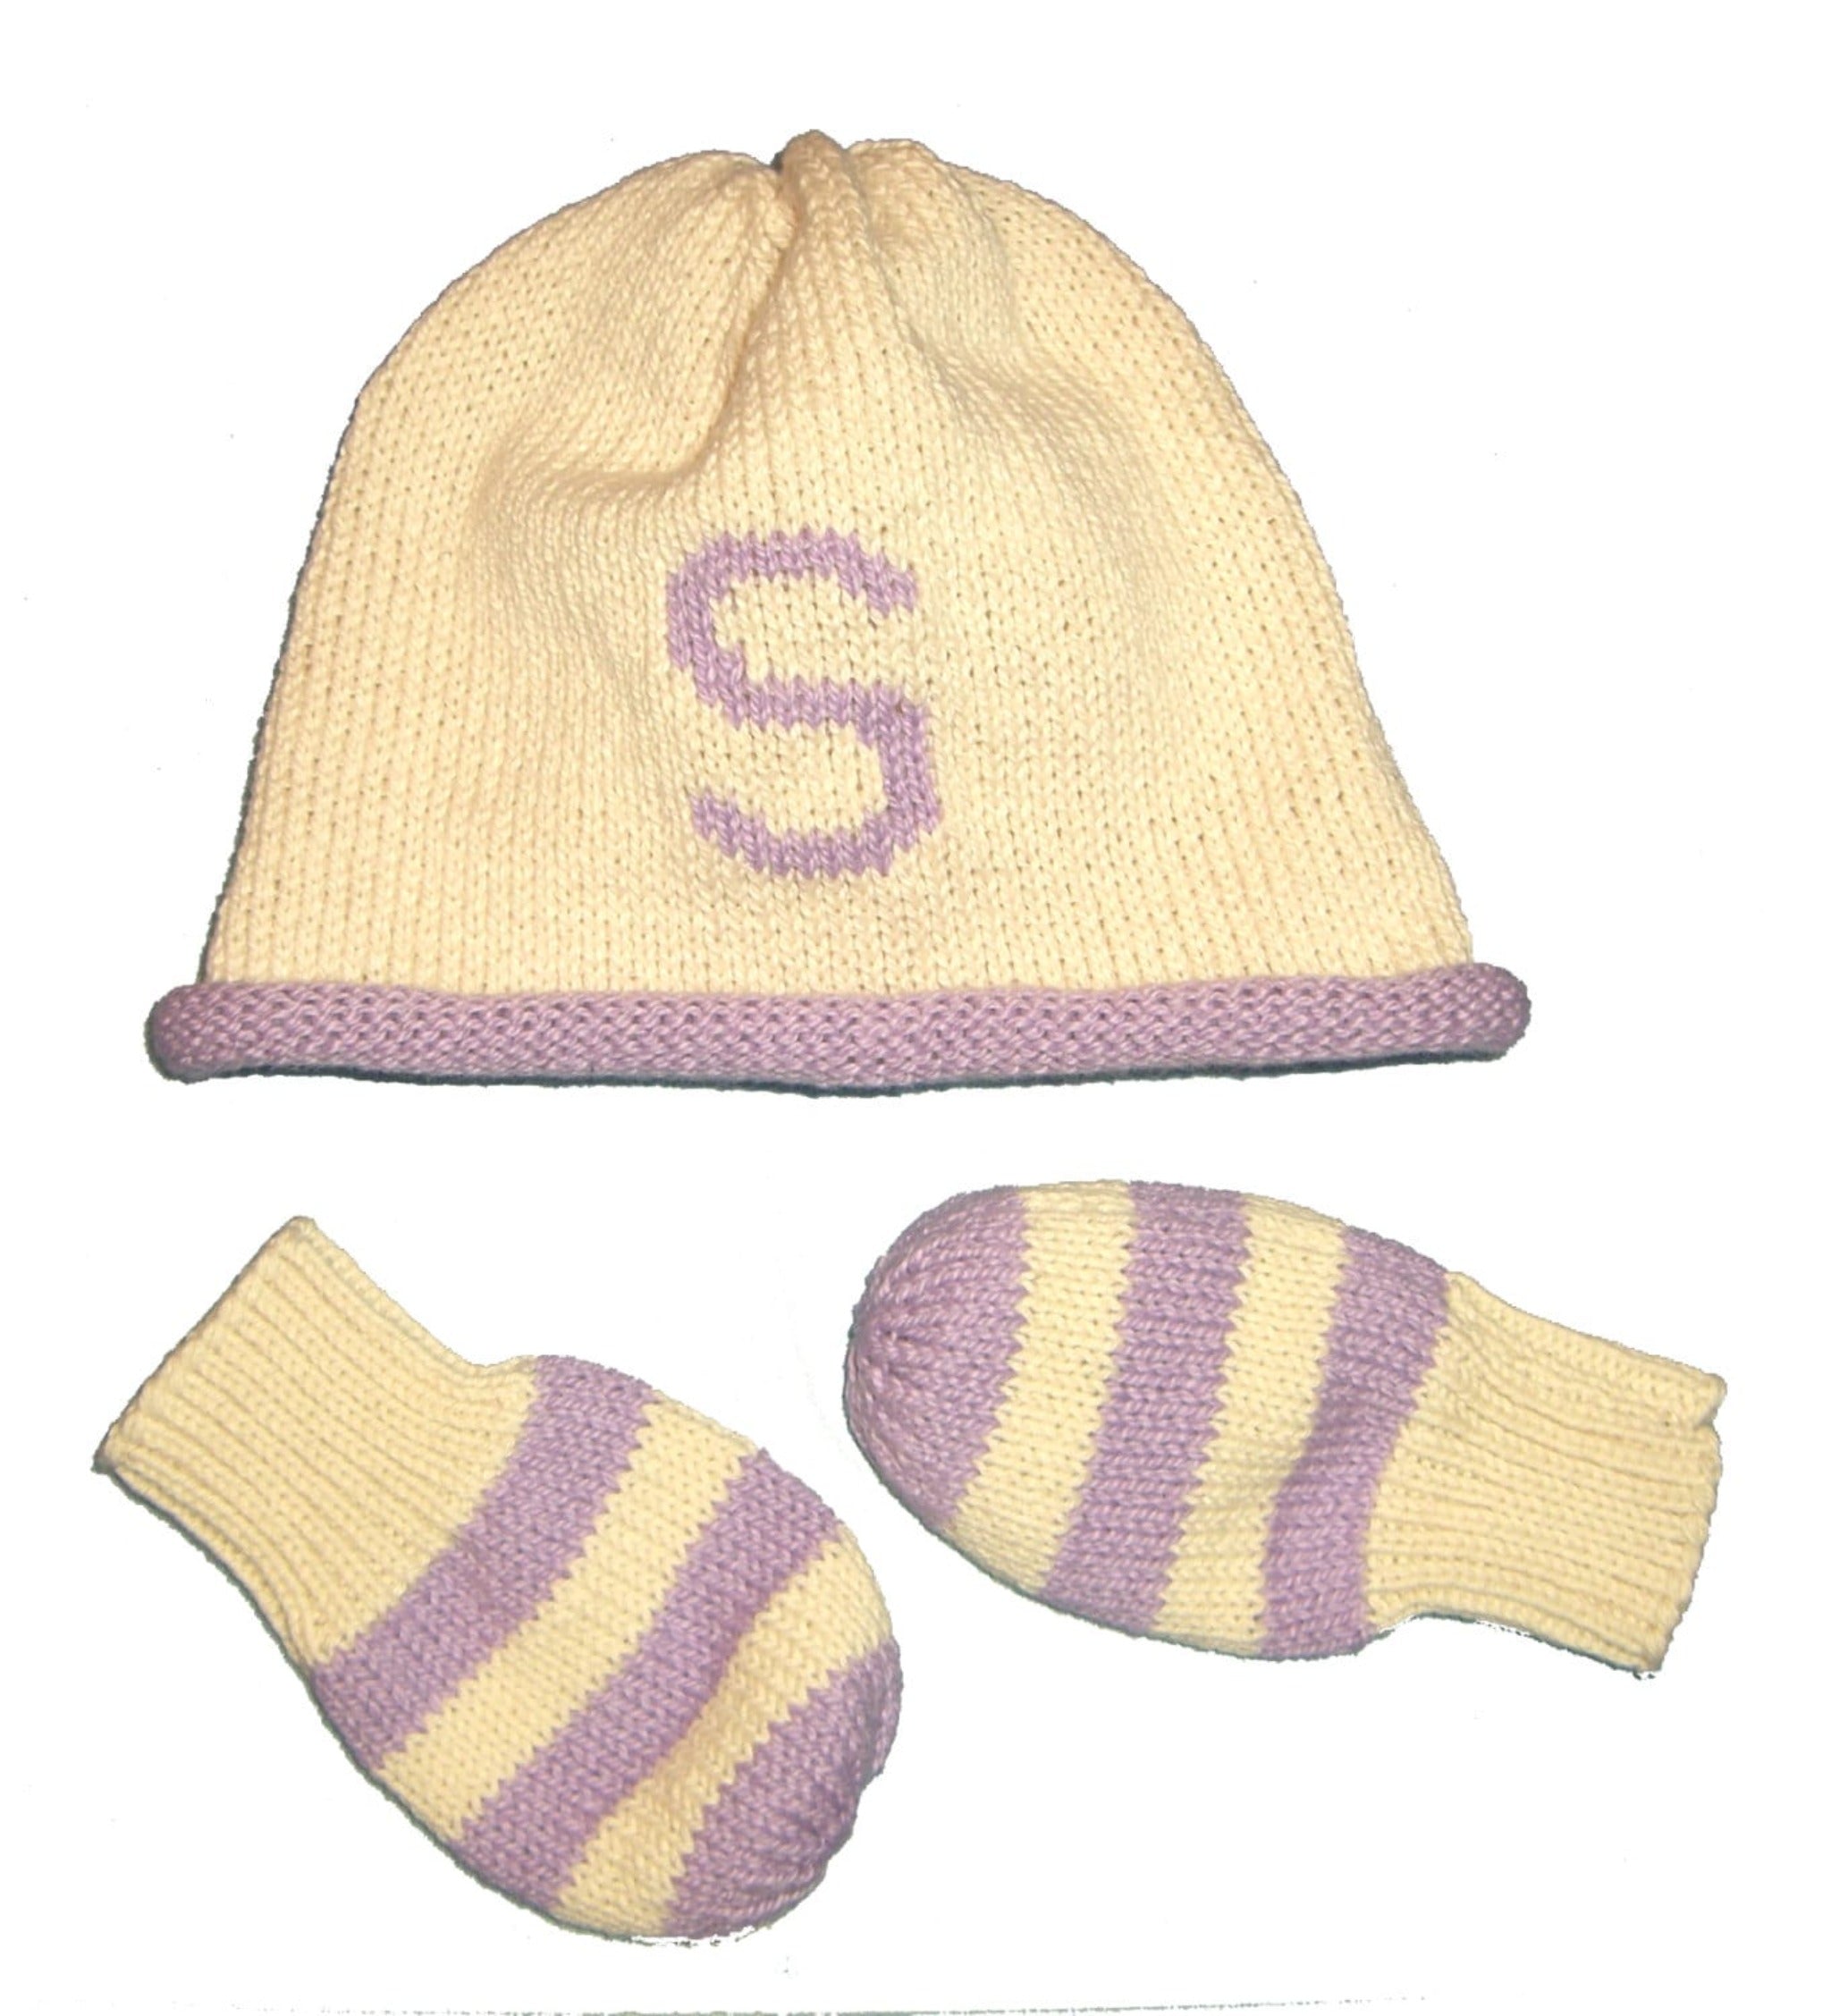 Personalized Hat and Mitten Set for Baby - Custom Knits for Baby